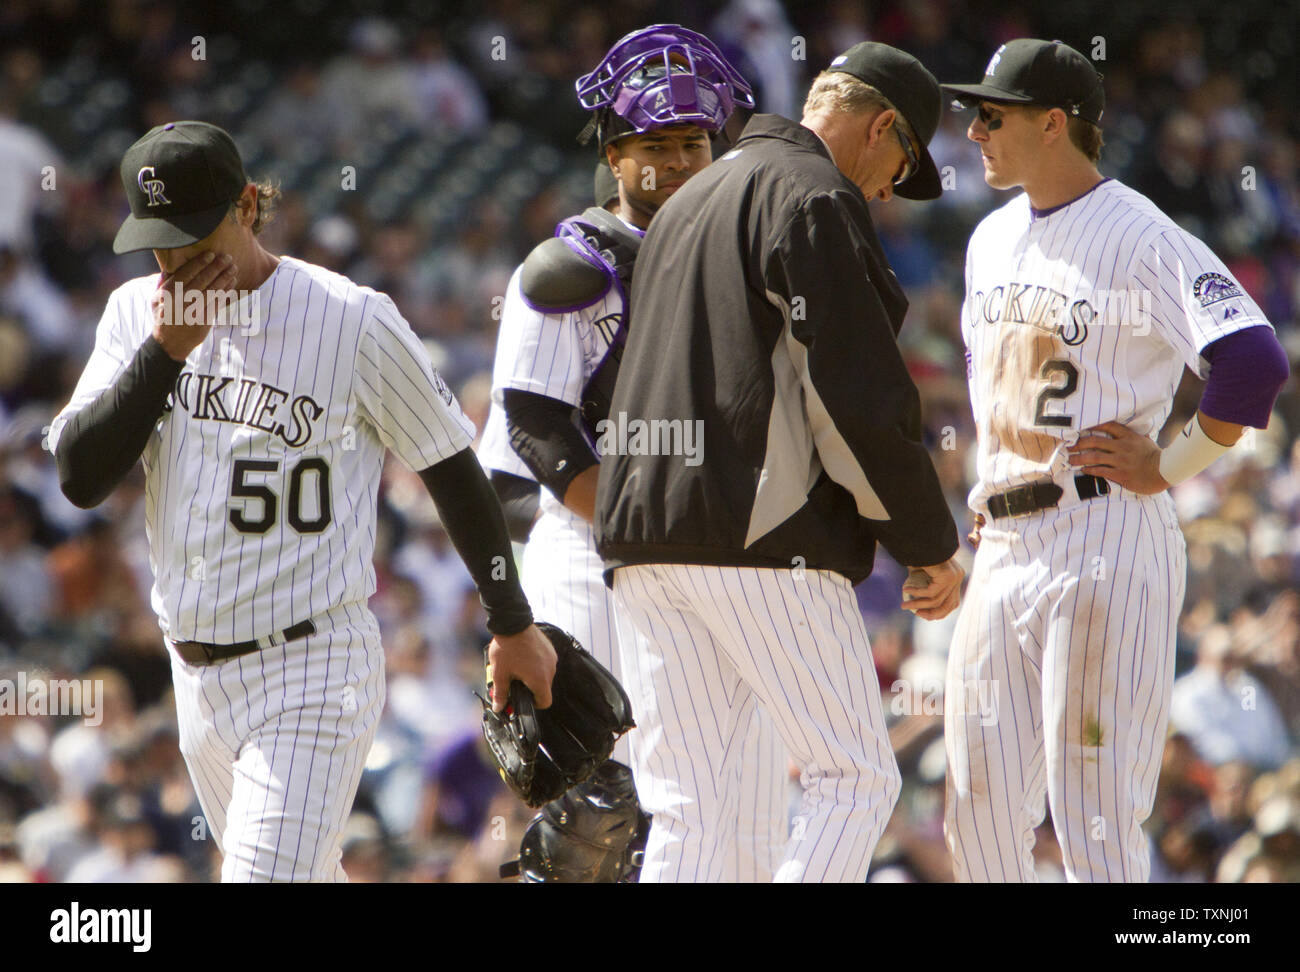 49 year old Colorado Rockies starting pitcher Jamie Moyer (50) leaves the field after being relieved in the sixth inning against the San Francisco Giants at Coors Field on April 12, 2012 in Denver.  Moyer is the second oldest person behind the great Satchel Paige but failed to earn the win in his second outing of the season.     UPI/Gary C. Caskey Stock Photo